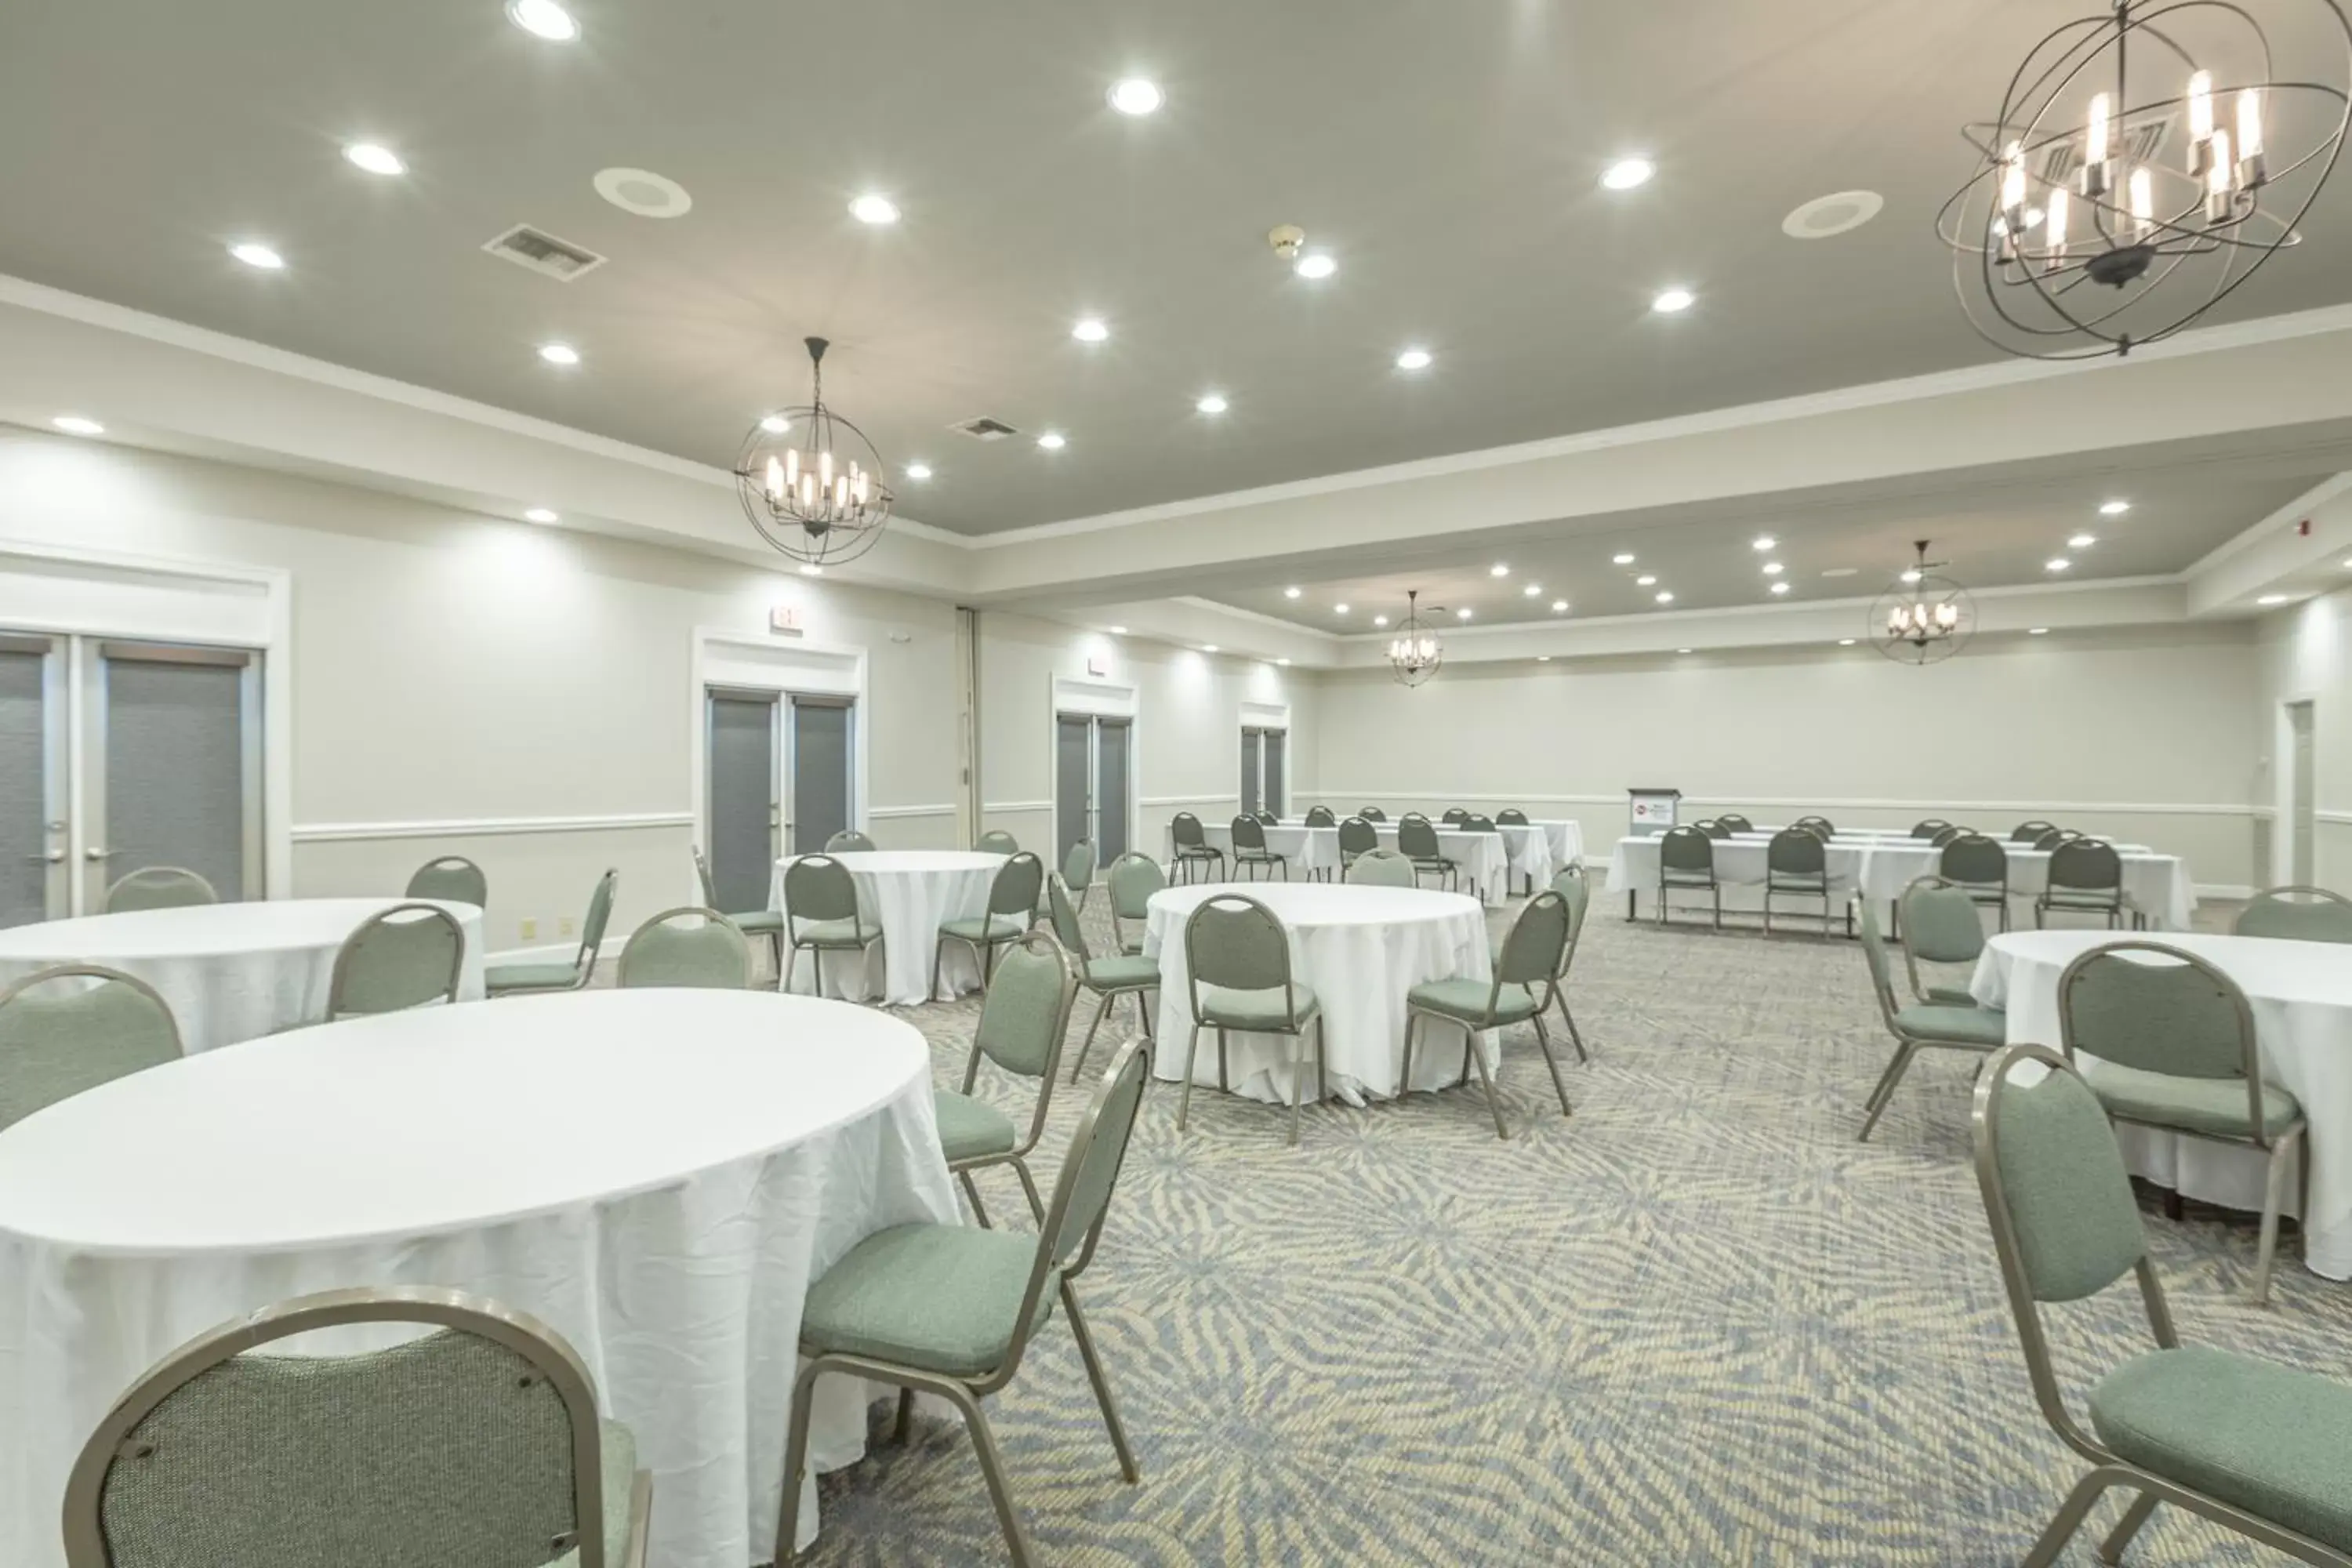 Property building, Banquet Facilities in Best Western Plus St. Simons